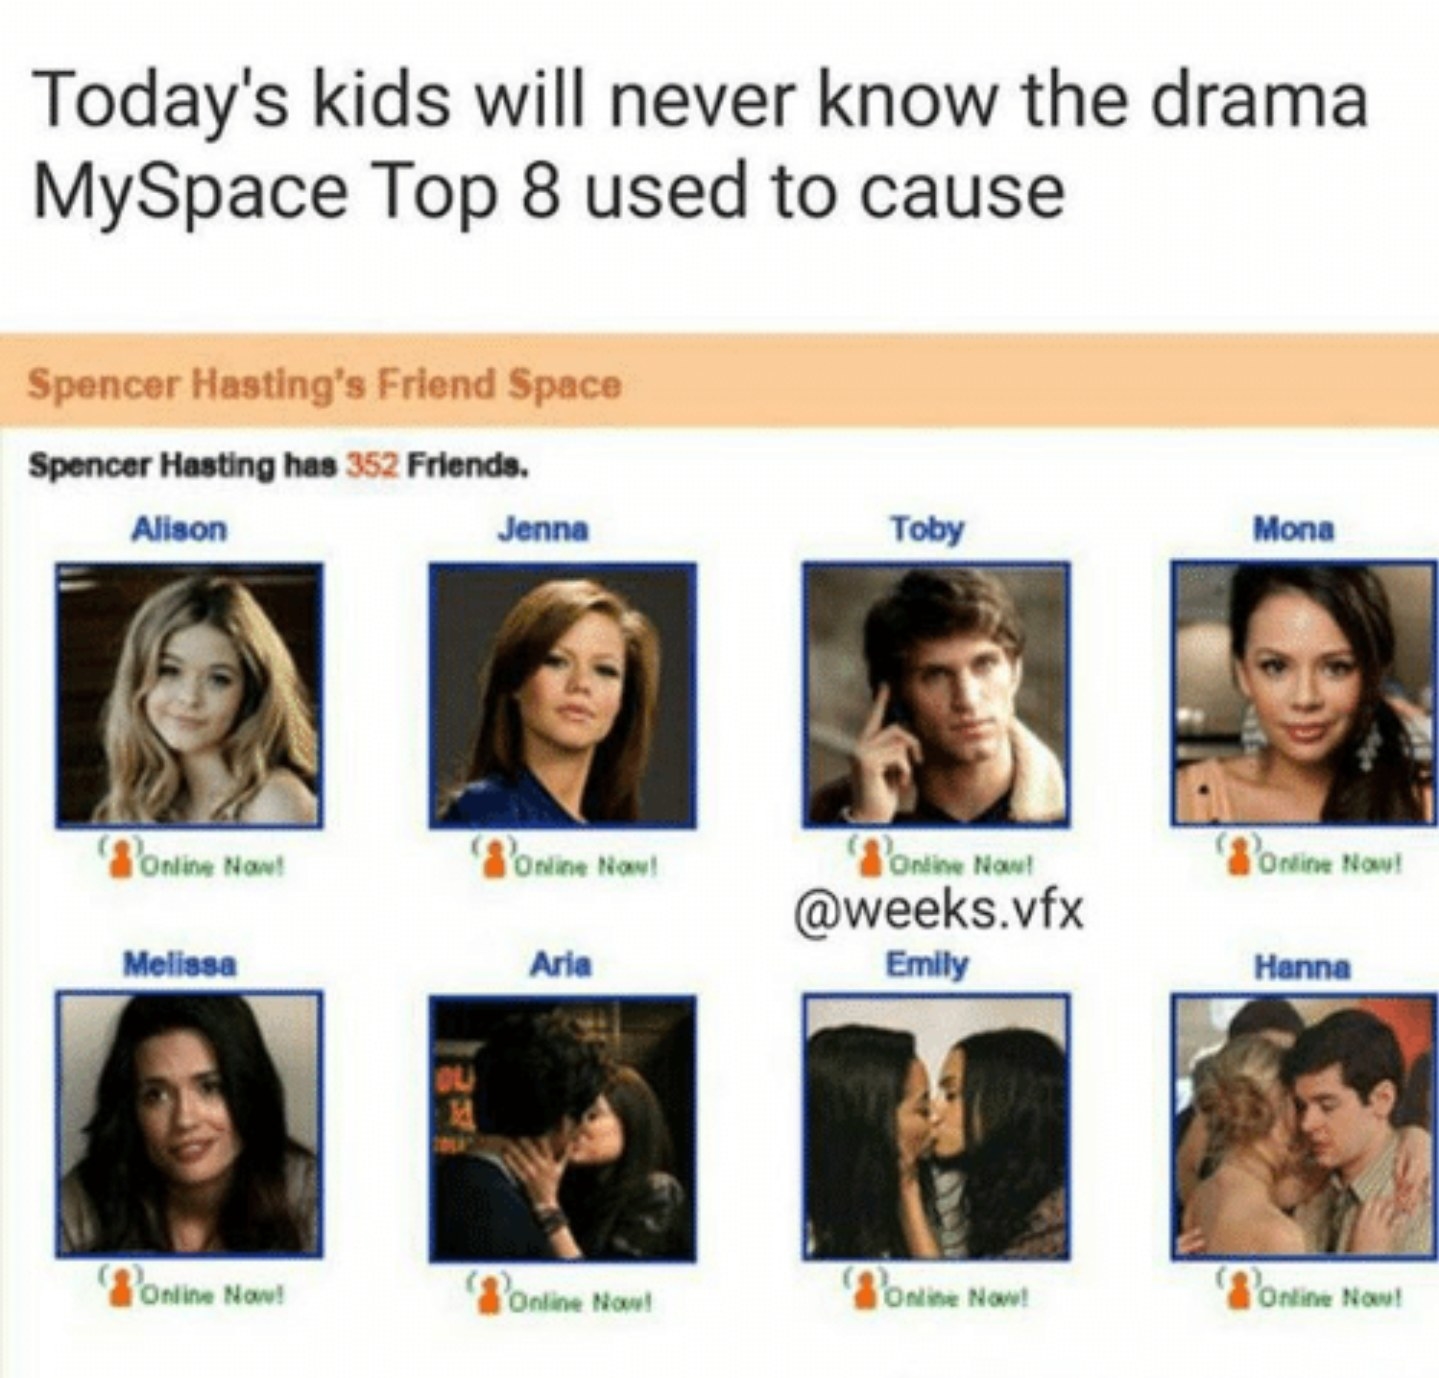 A Myspace Top 8 screenshot with the words &quot;Today&#x27;s kids will never know the drama MySpace Top 8 used to cause&quot;